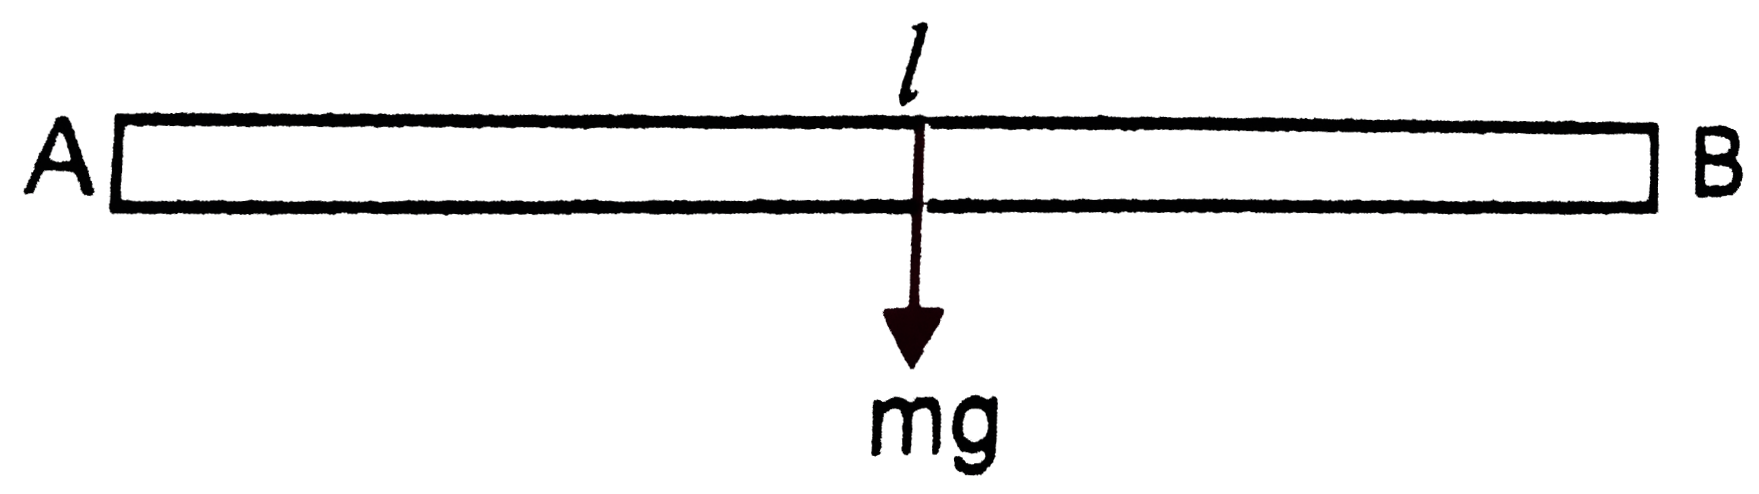 A unifrom rod of length l and mass m is free to rotate in a vertical plane about A, Fig. The rod initially in horizontal position is released. The initial angular acceleration of the rod is (MI